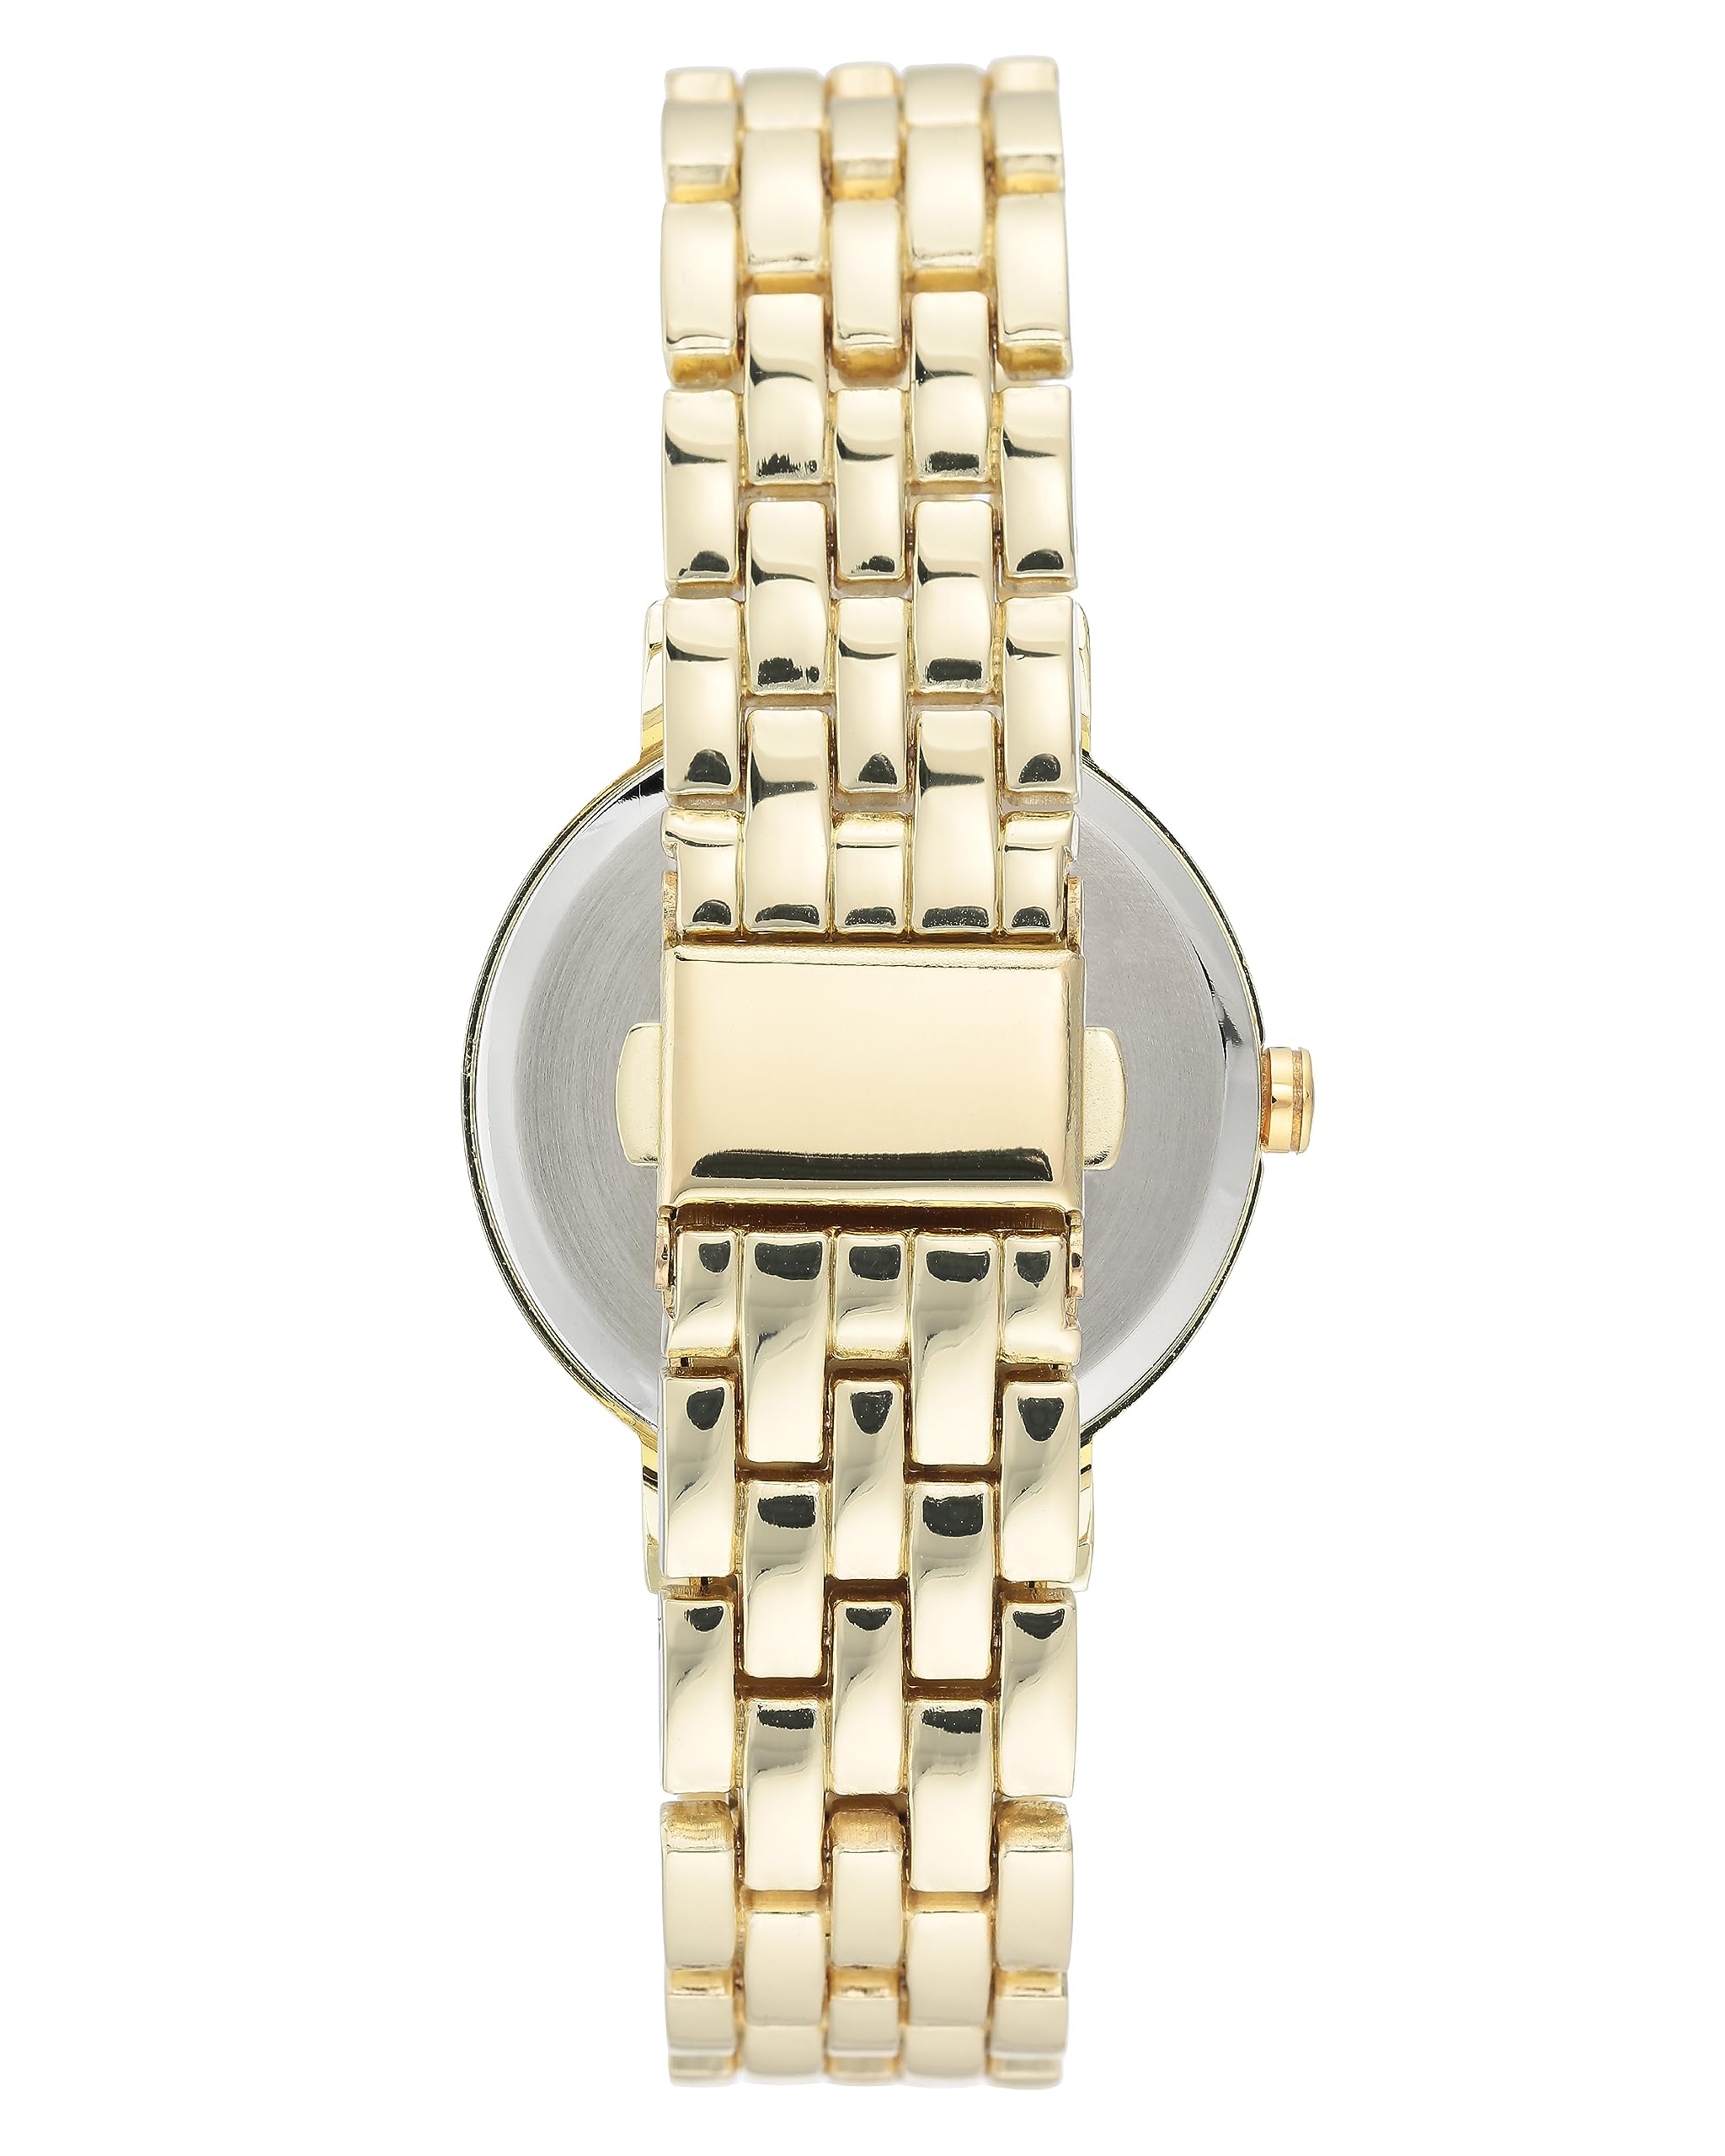 NINE WEST Women's Glitter Accented Dial Watch, NW/2402